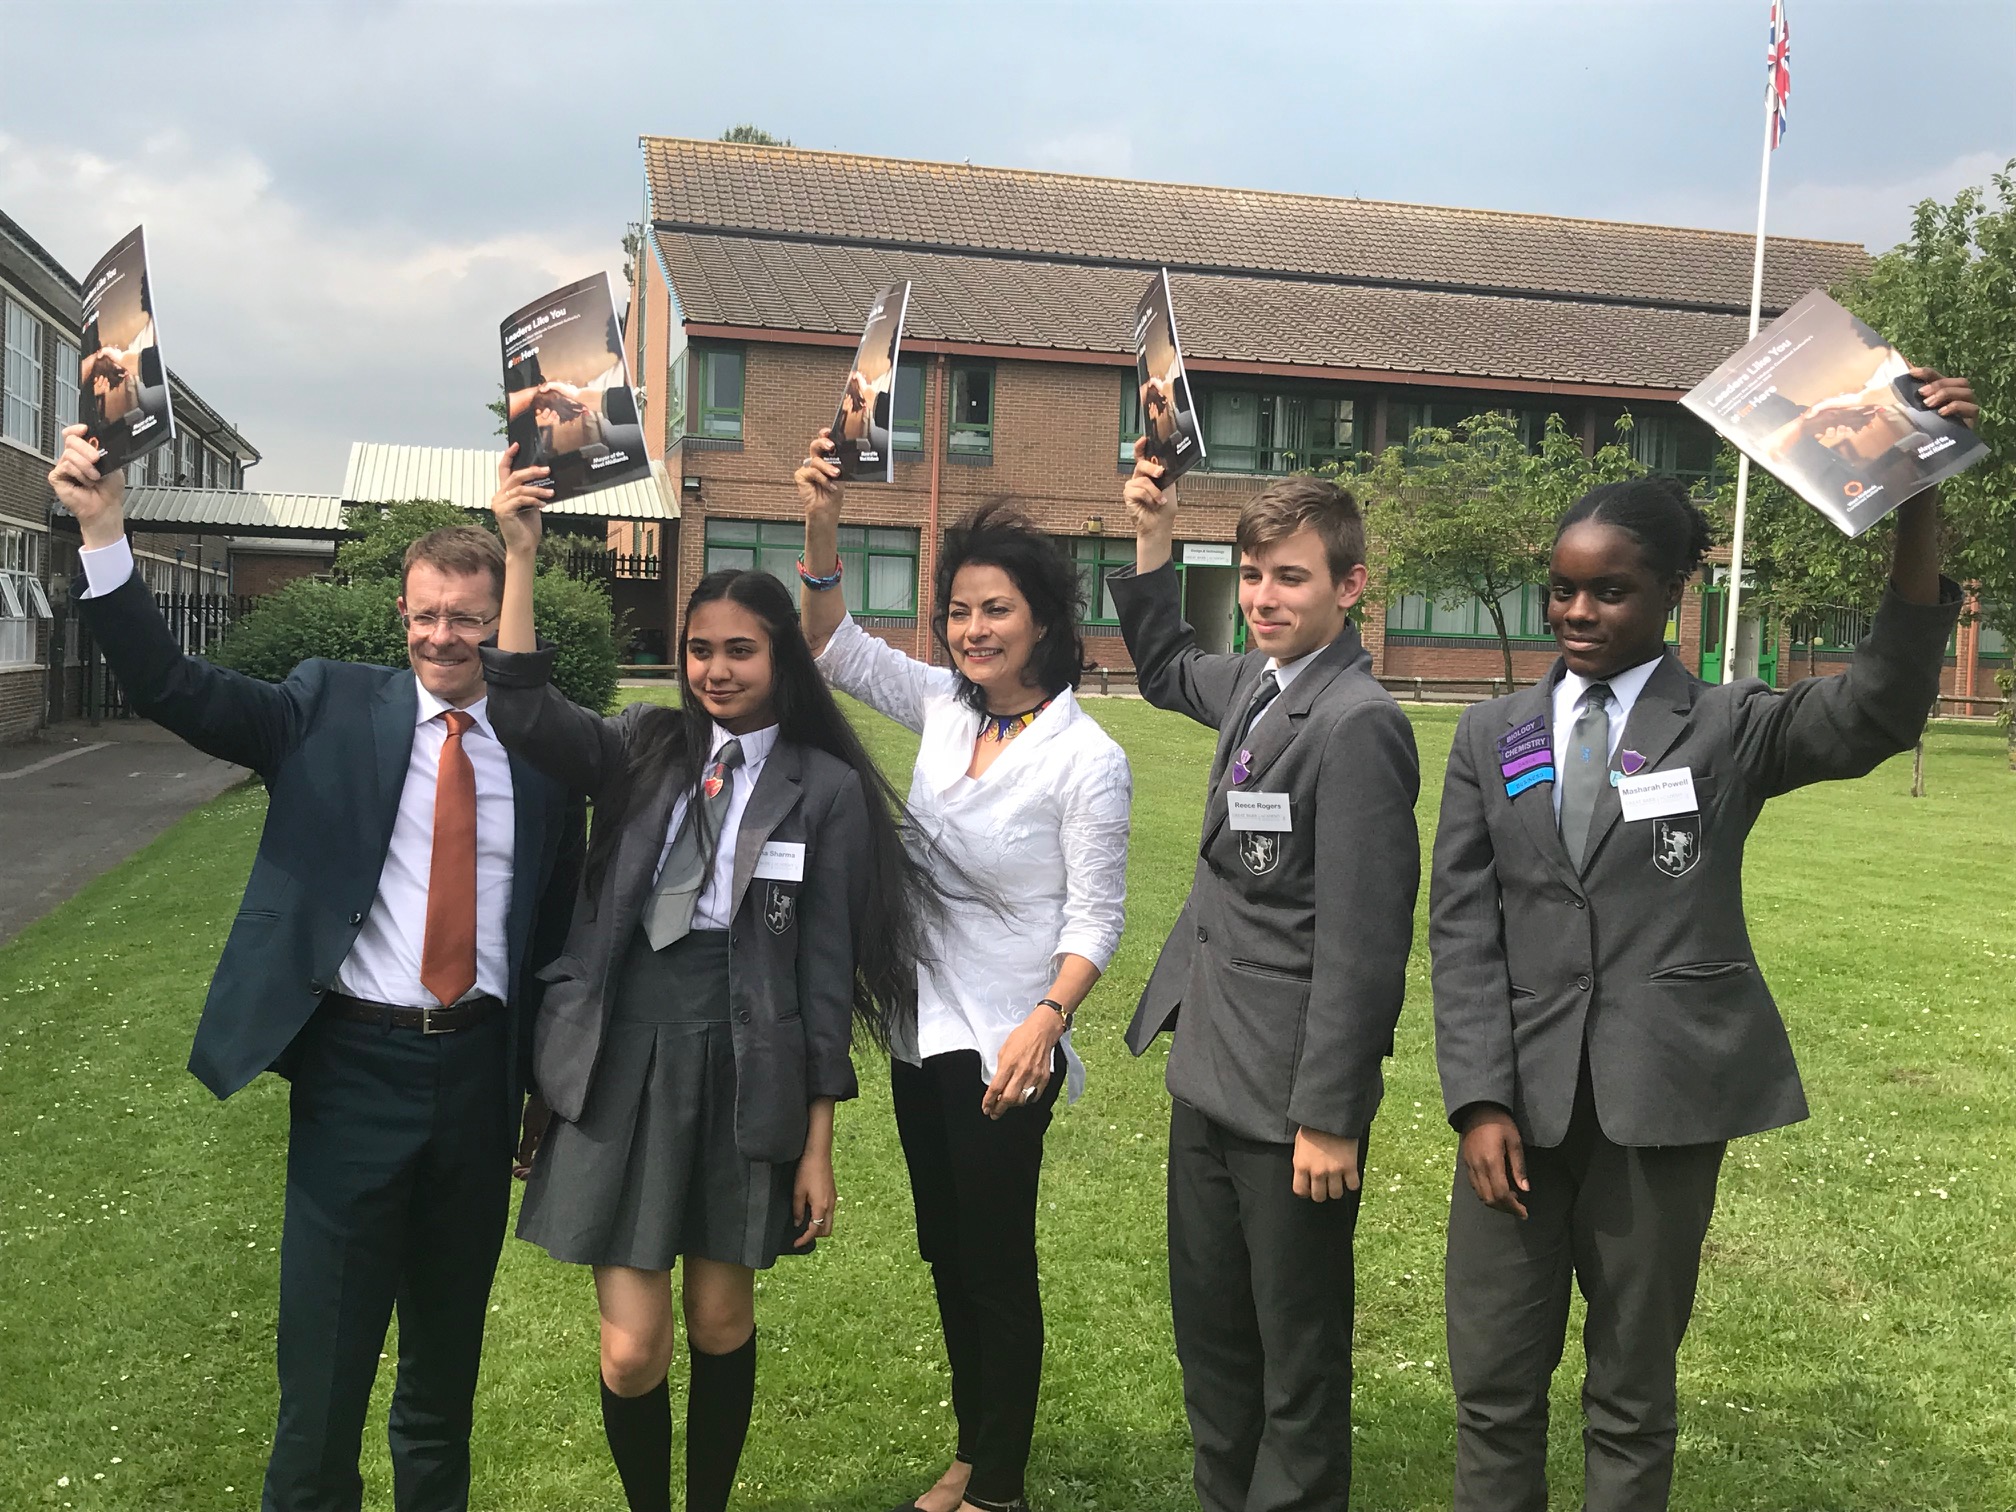 Leaders of the future? Mayor of the West Midlands Andy Street (left) with chair of the Leadership Commission Anita Bhalla OBE (centre) and young pupils at the launch of the Leaders Like You report